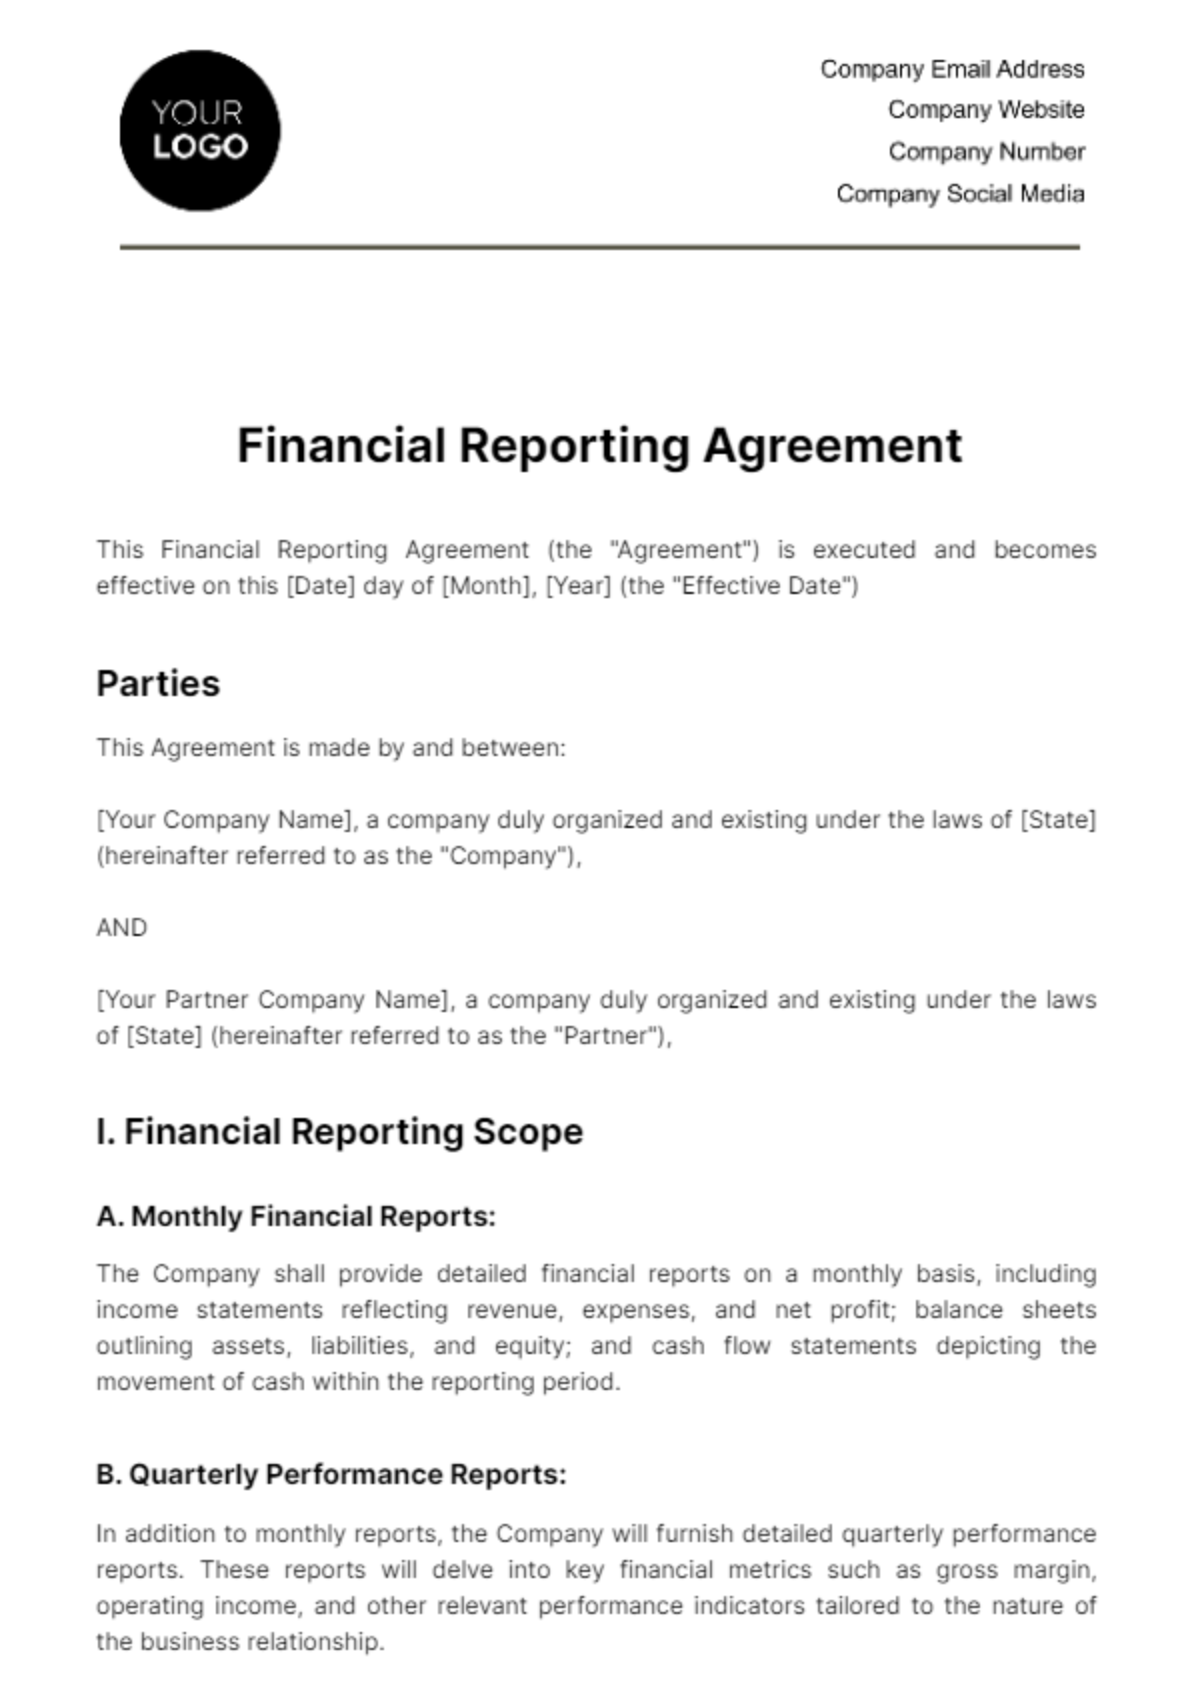 Free Financial Reporting Agreement Template